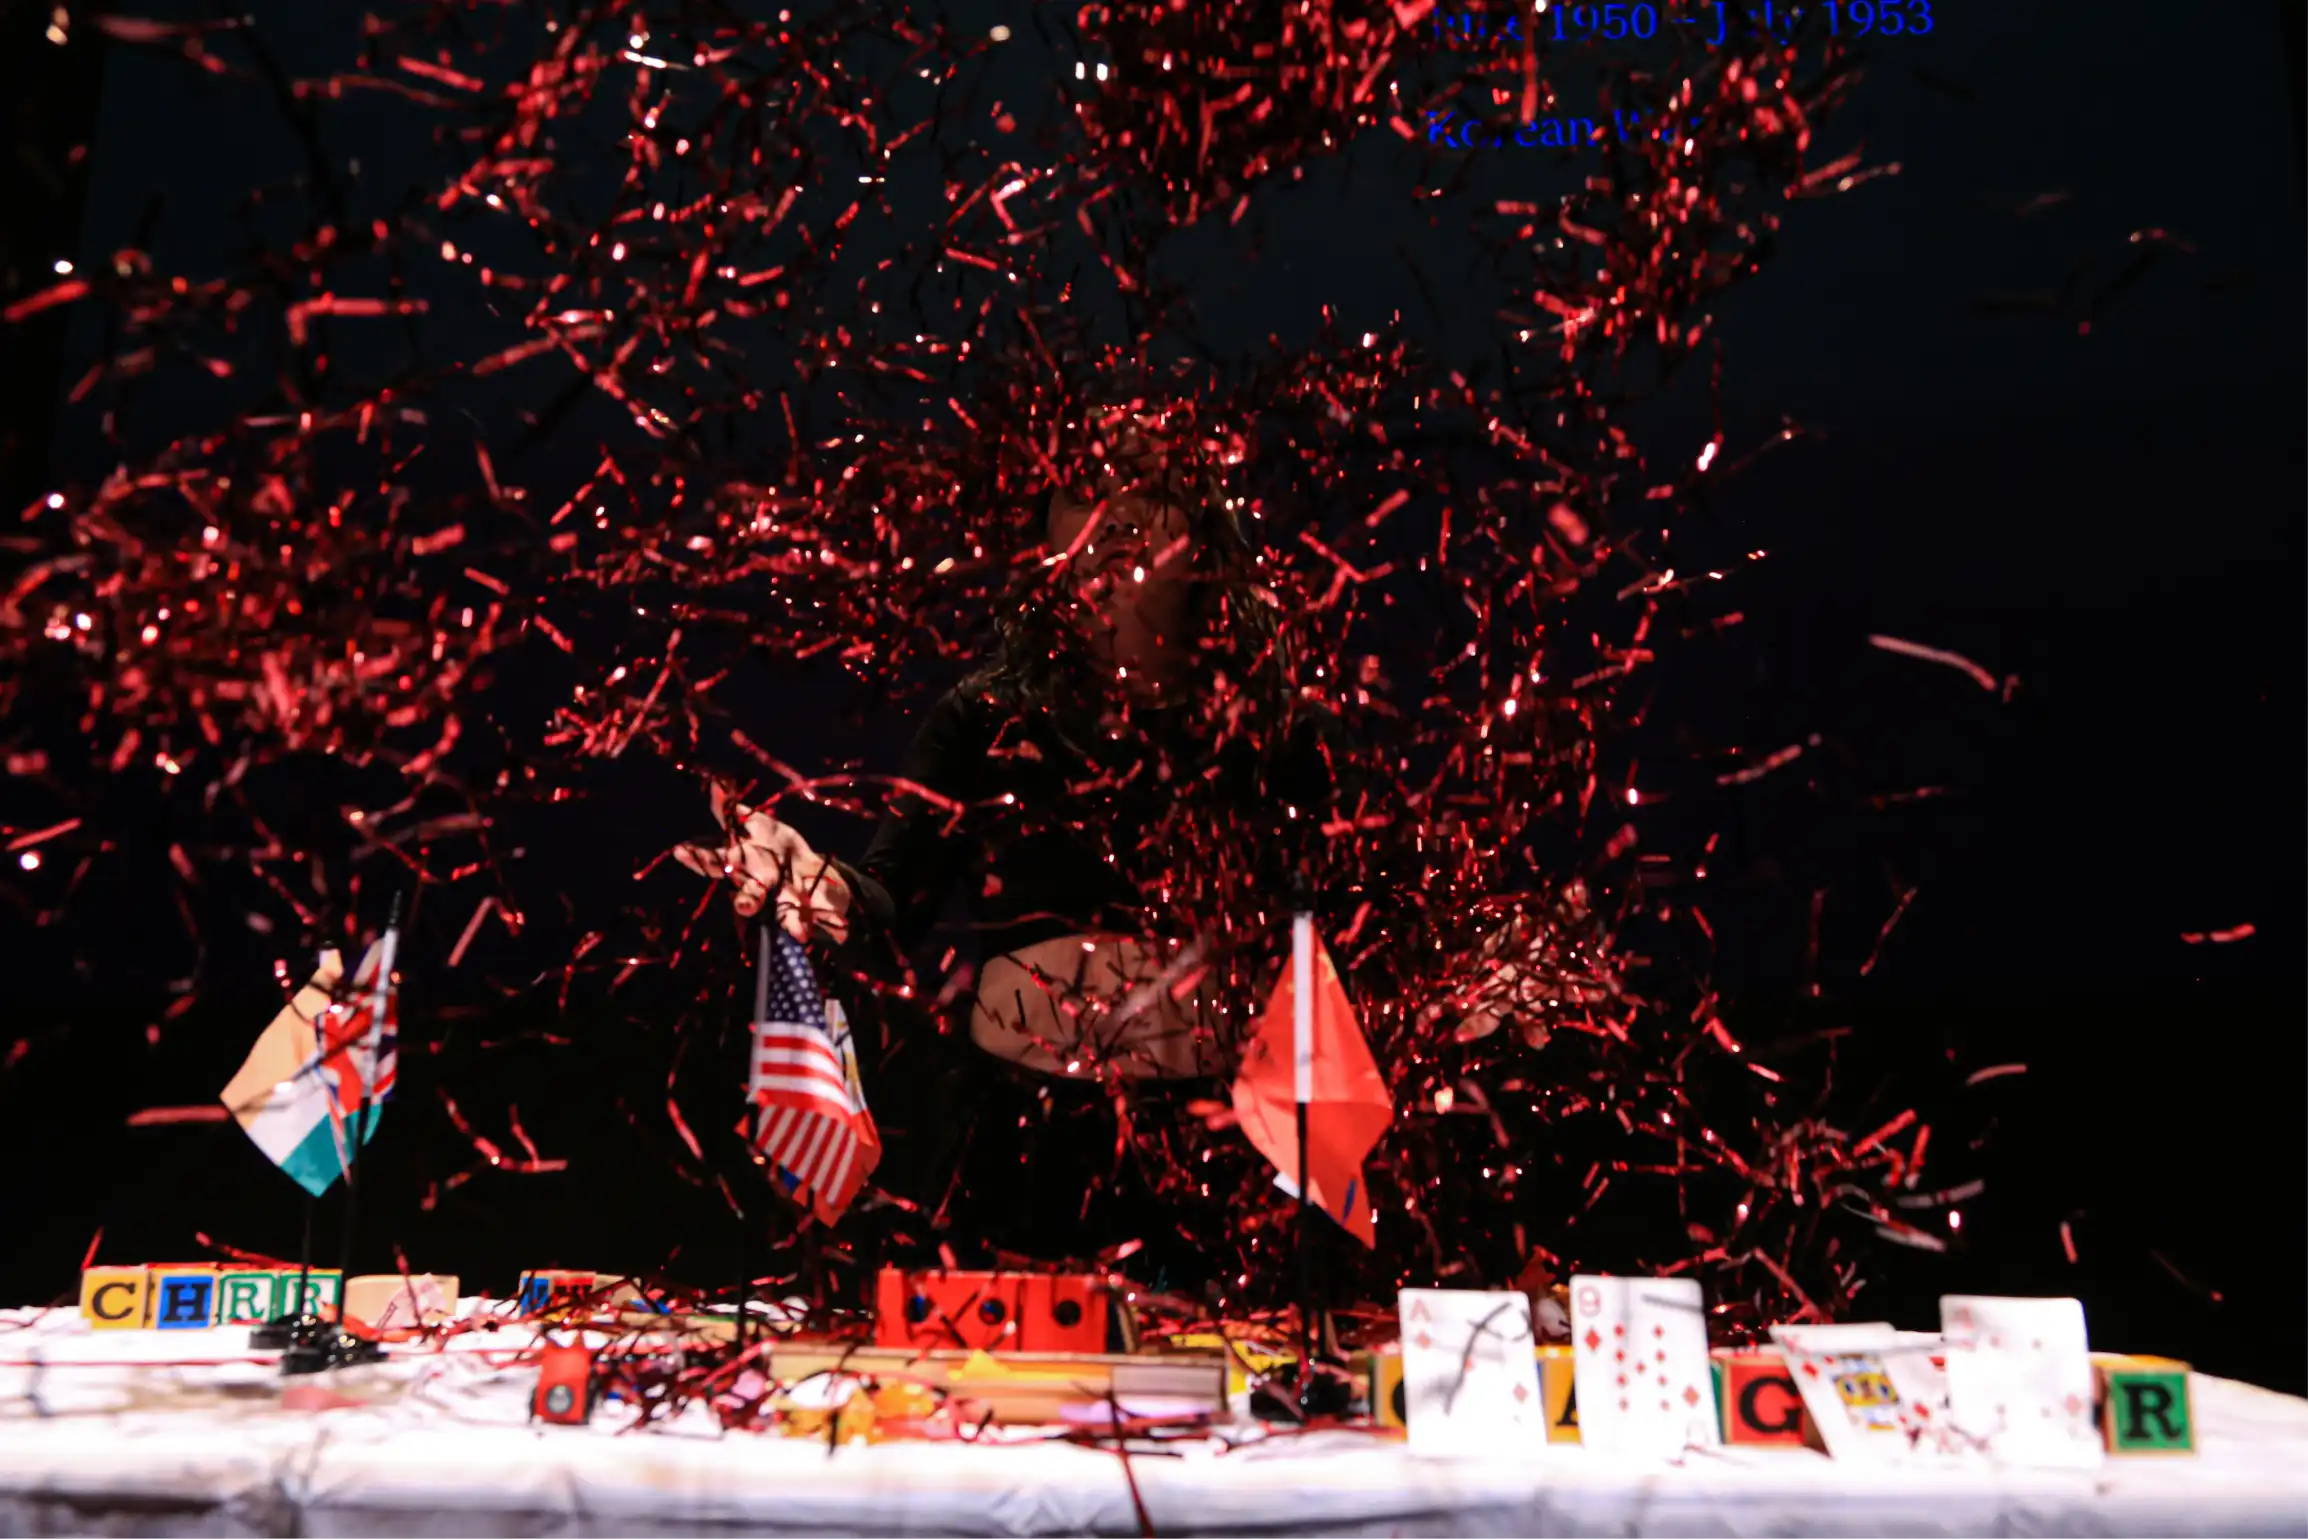 Confetti fall over a plastic table with American and Russian miniature flags, playing cards, wood blocks, and other toys